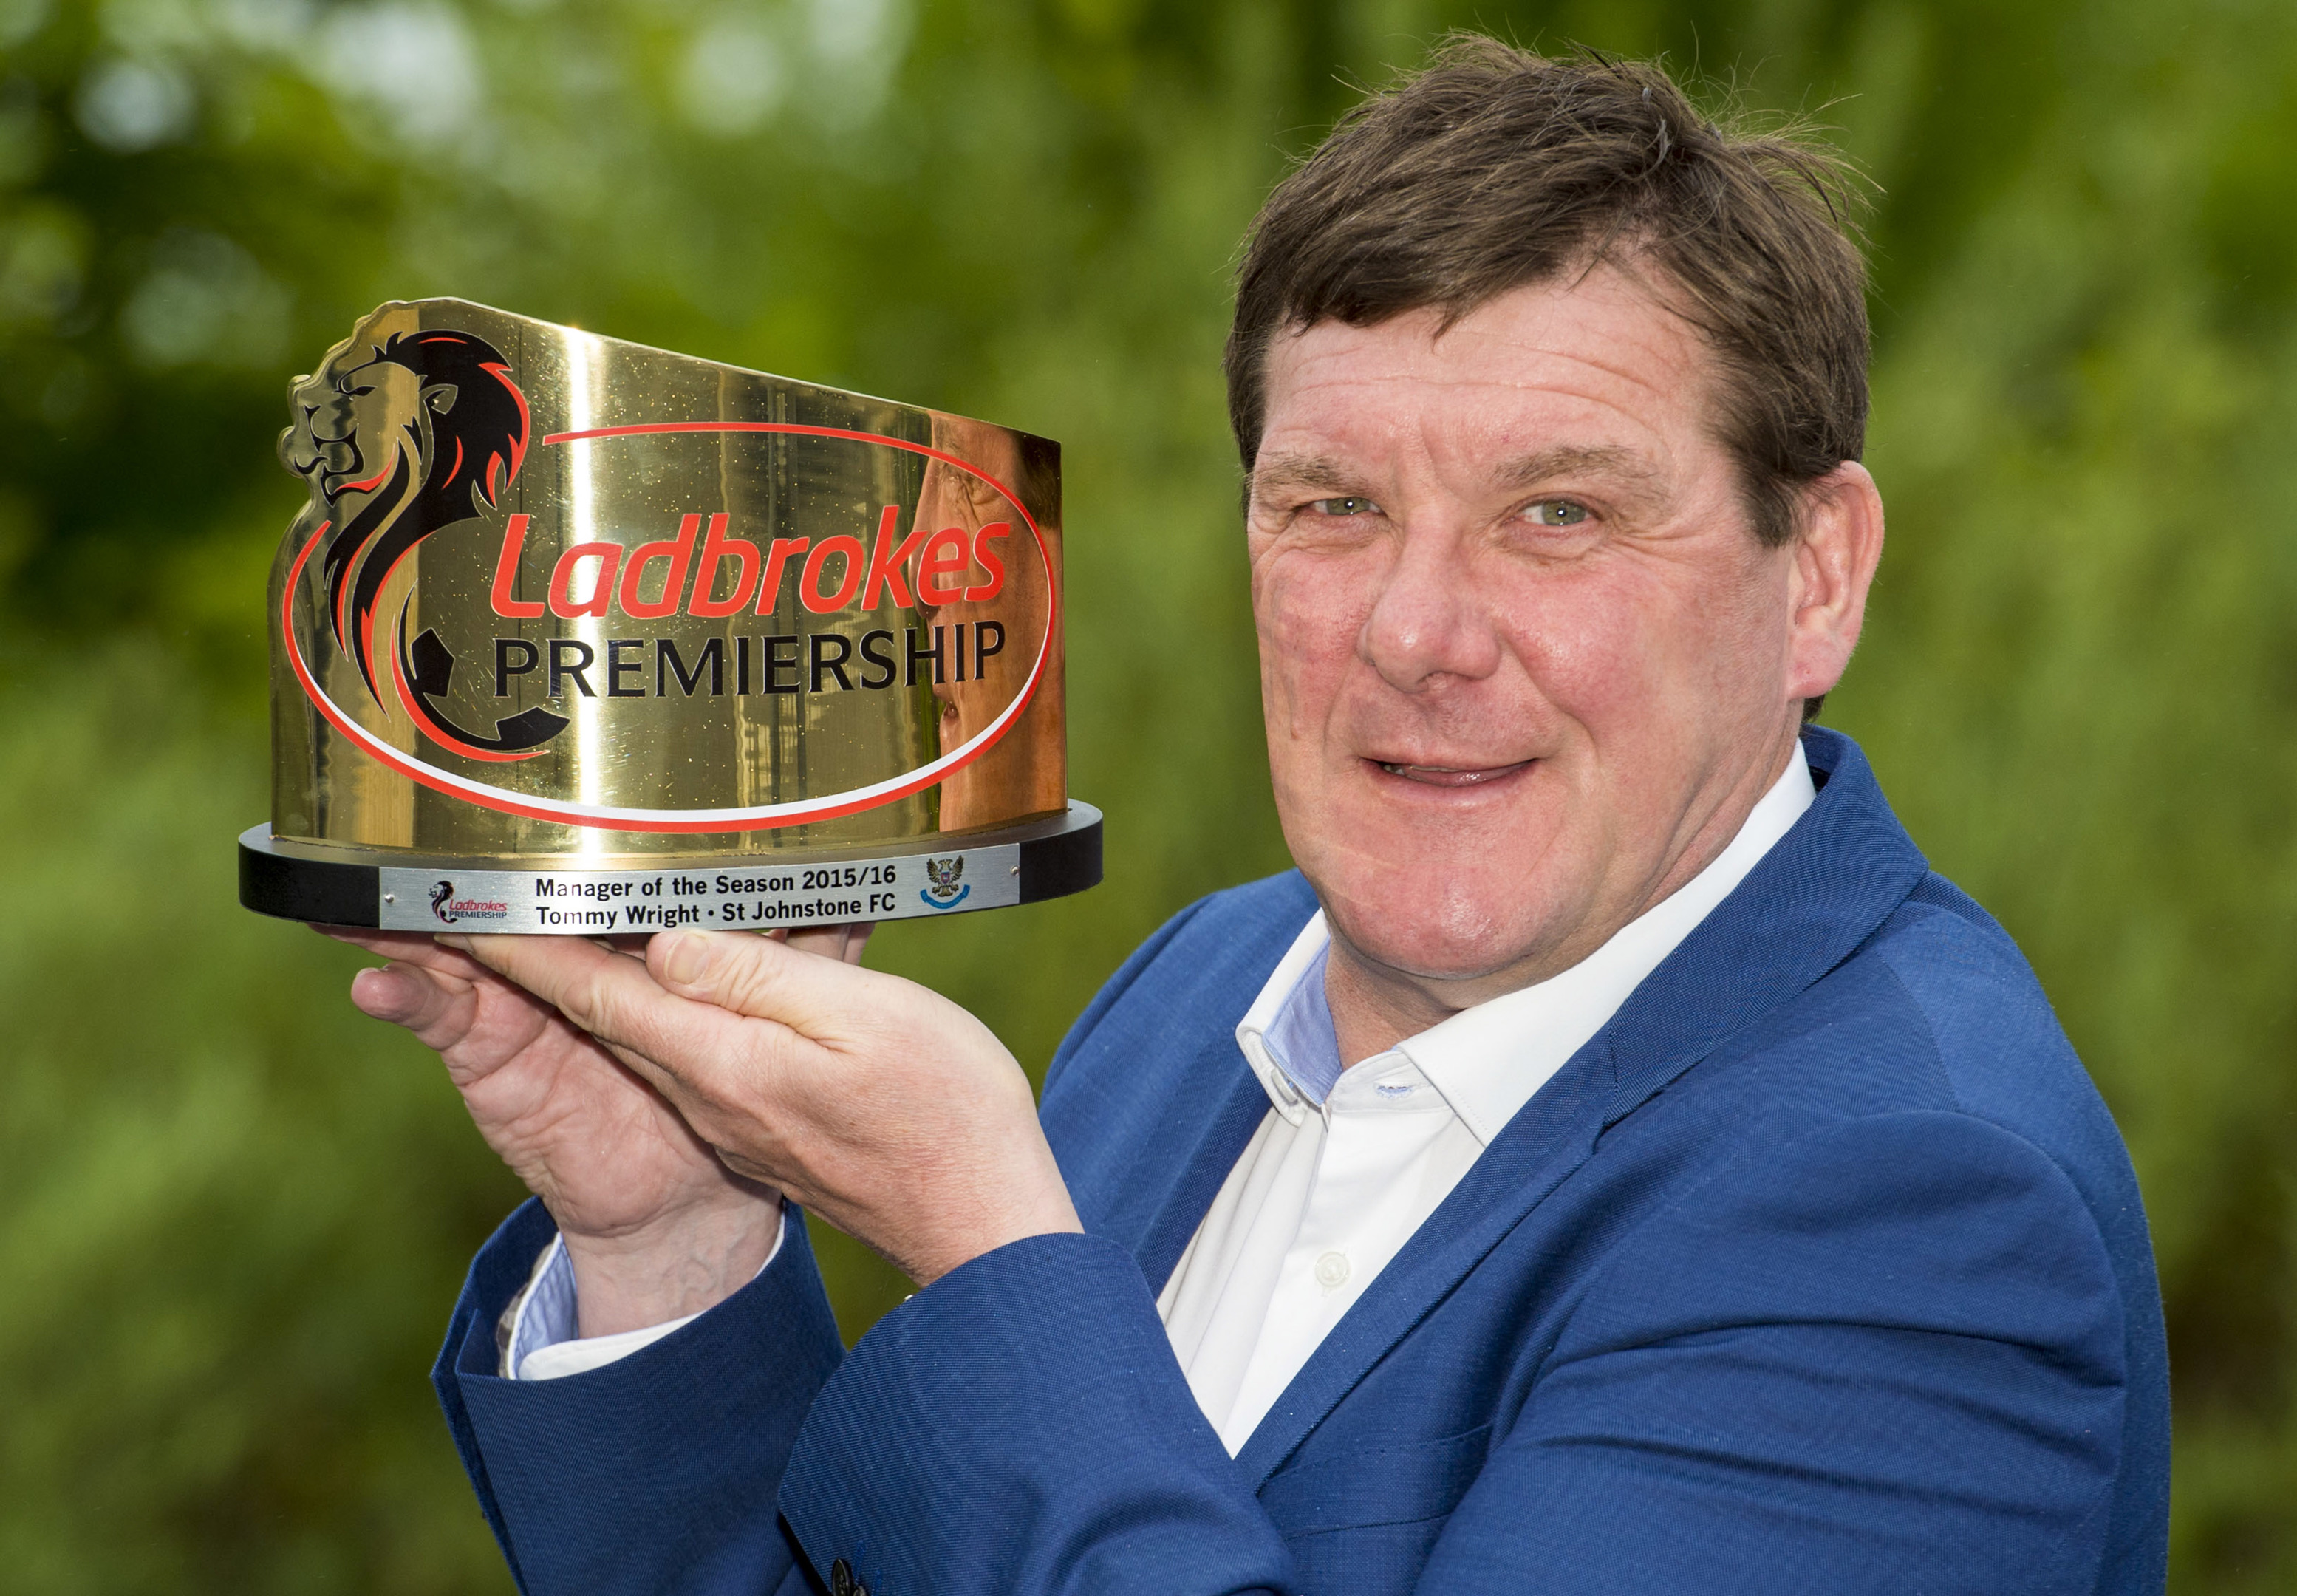 St Johnstone manager Tommy Wright is awarded the Ladbrokes Manager of the Season trophy (Alan Harvey / SNS Group)